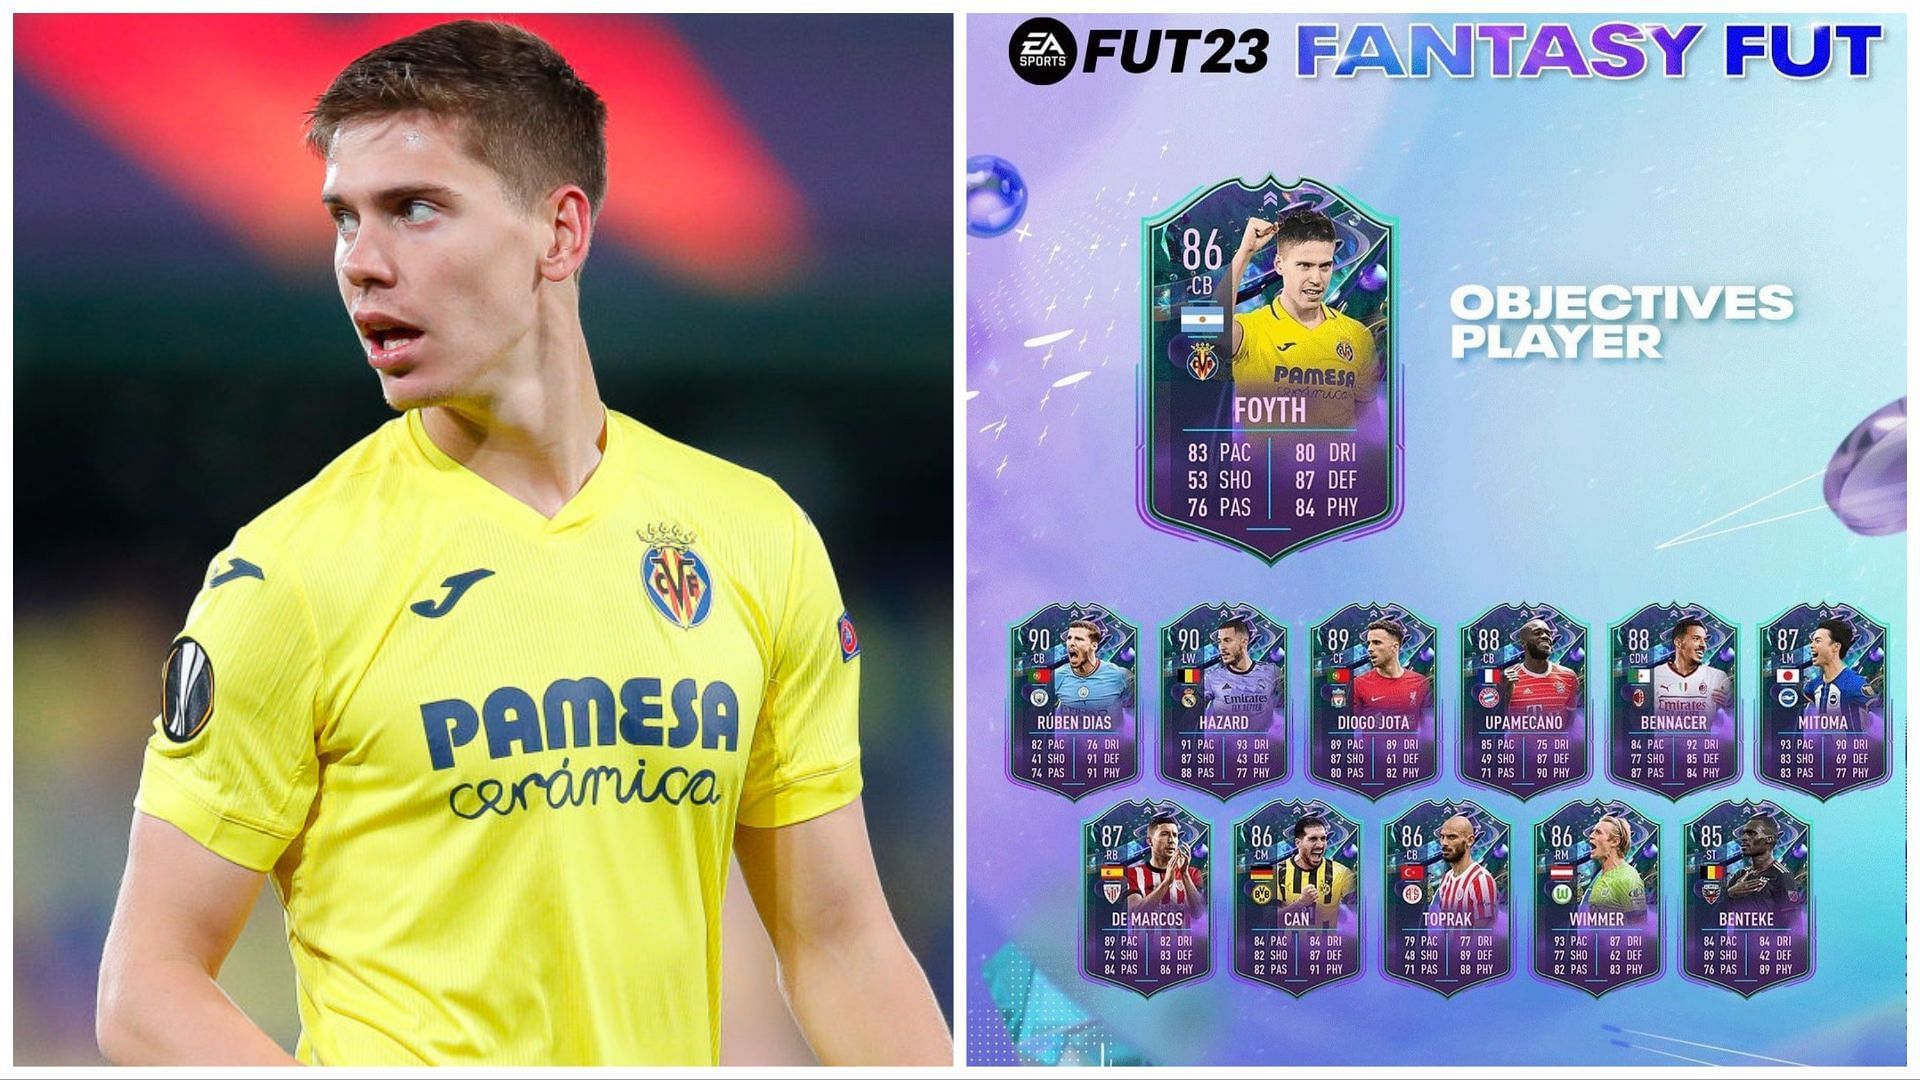 Fantasy FUT Juan Foyth is now available as an objective (Images via Getty and EA Sports)